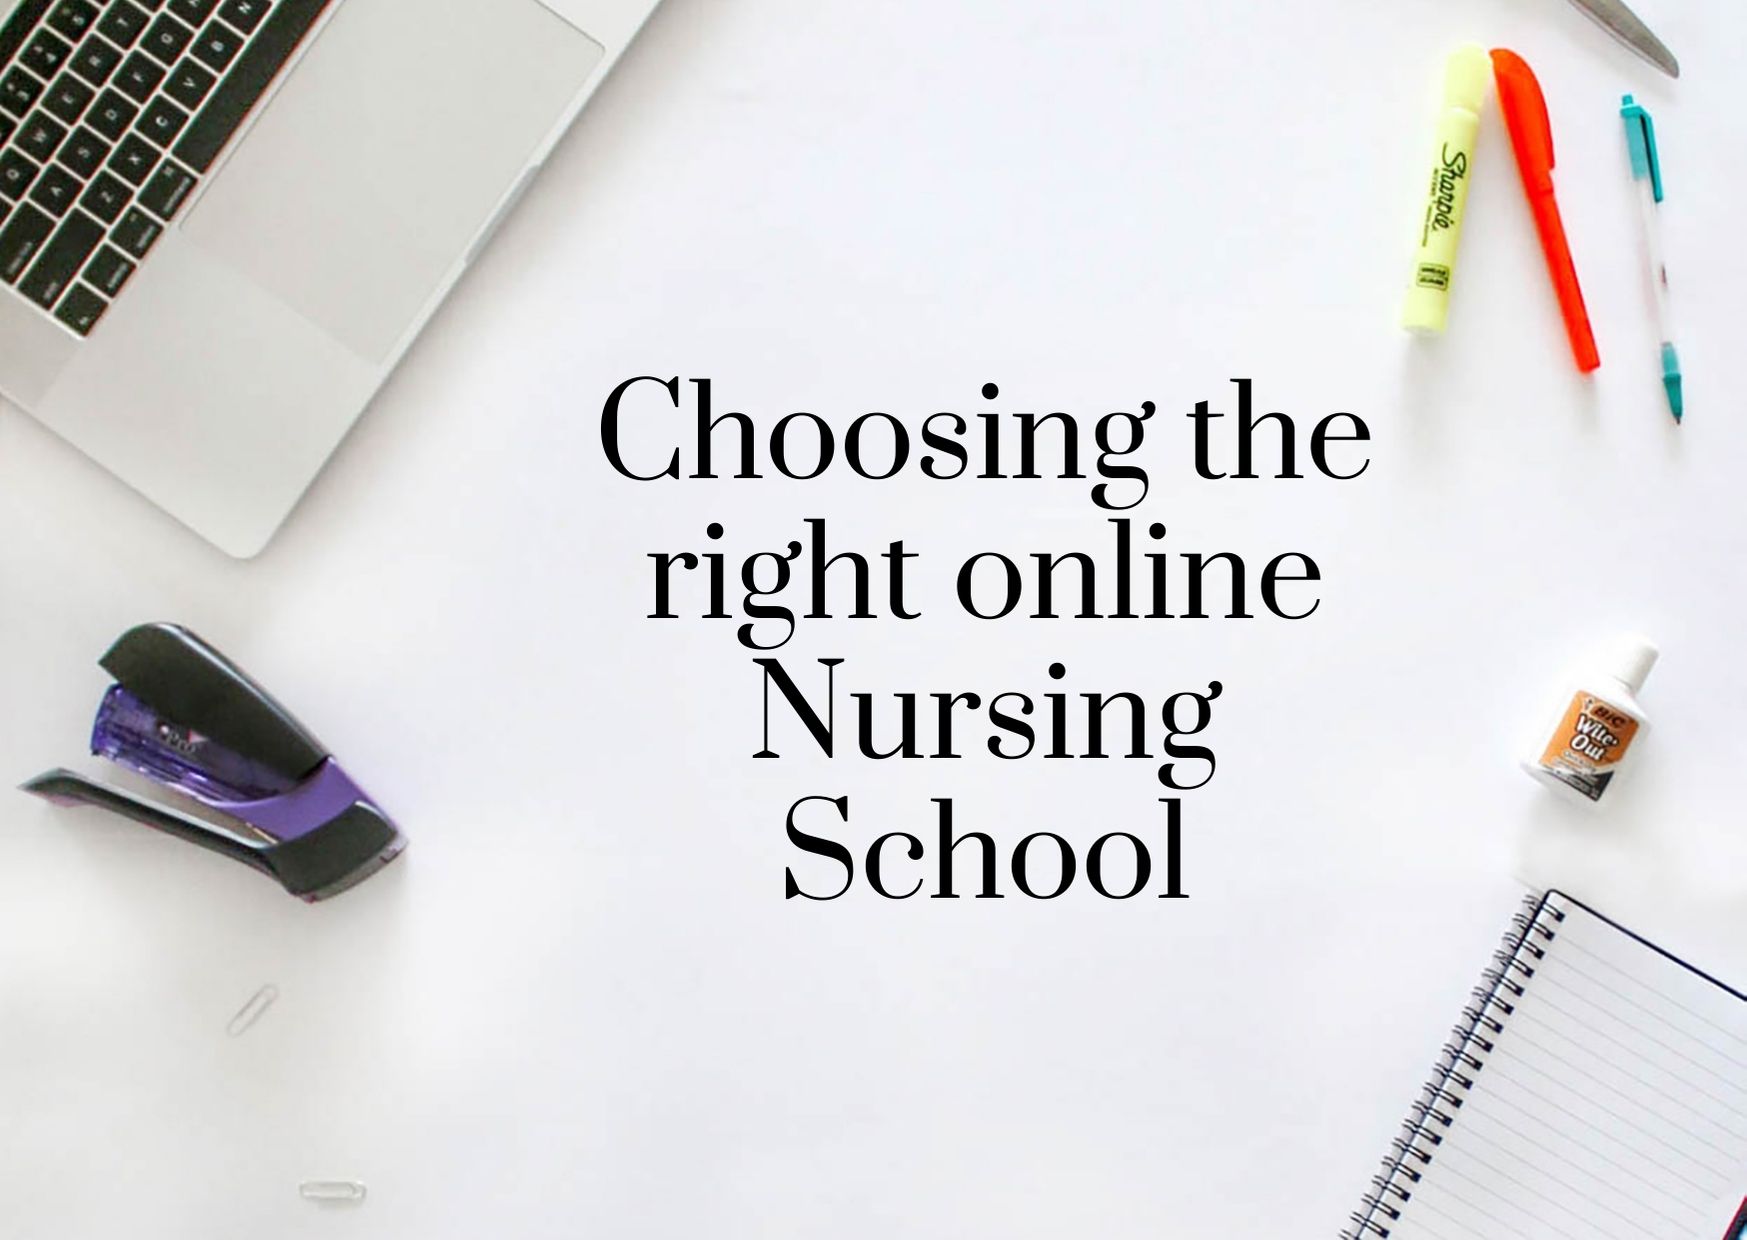 5 tips to choose the online nursing school right for you